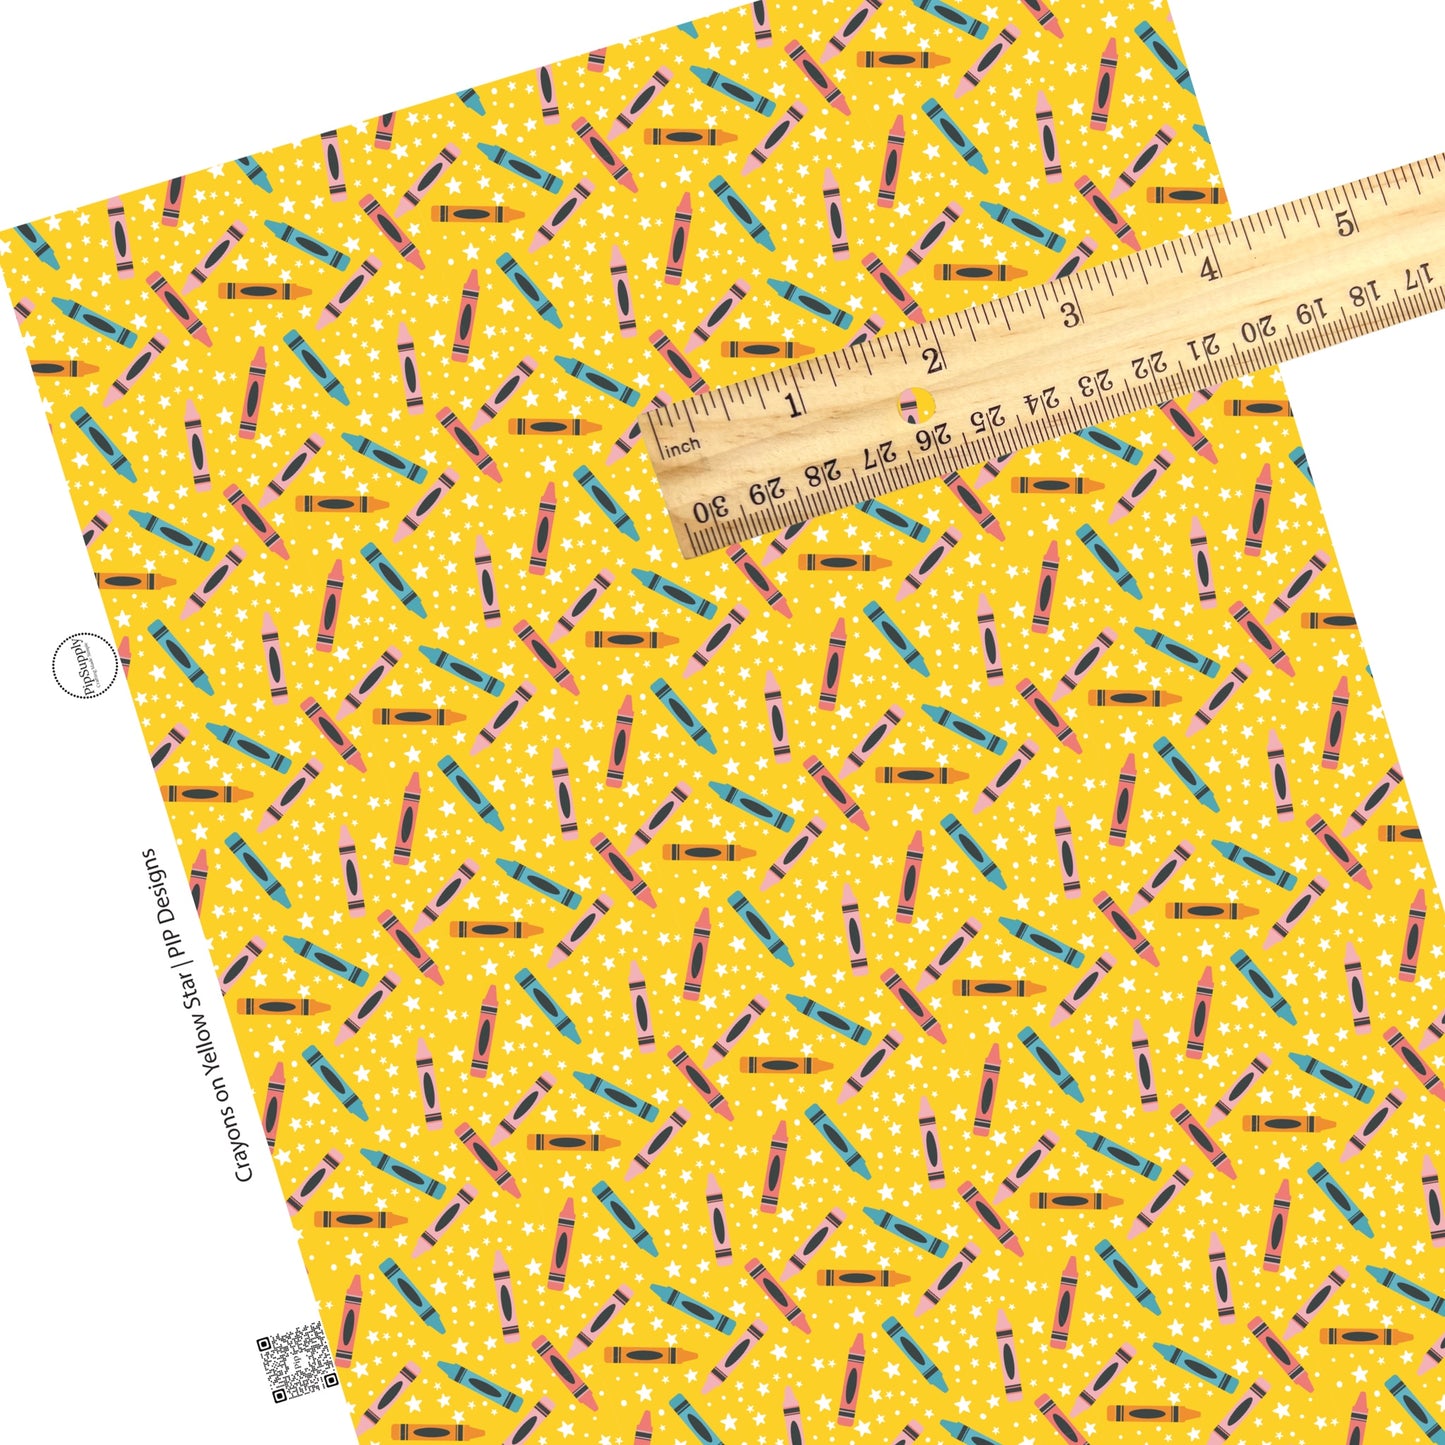 Colorful crayons with white stars on yellow faux leather sheets